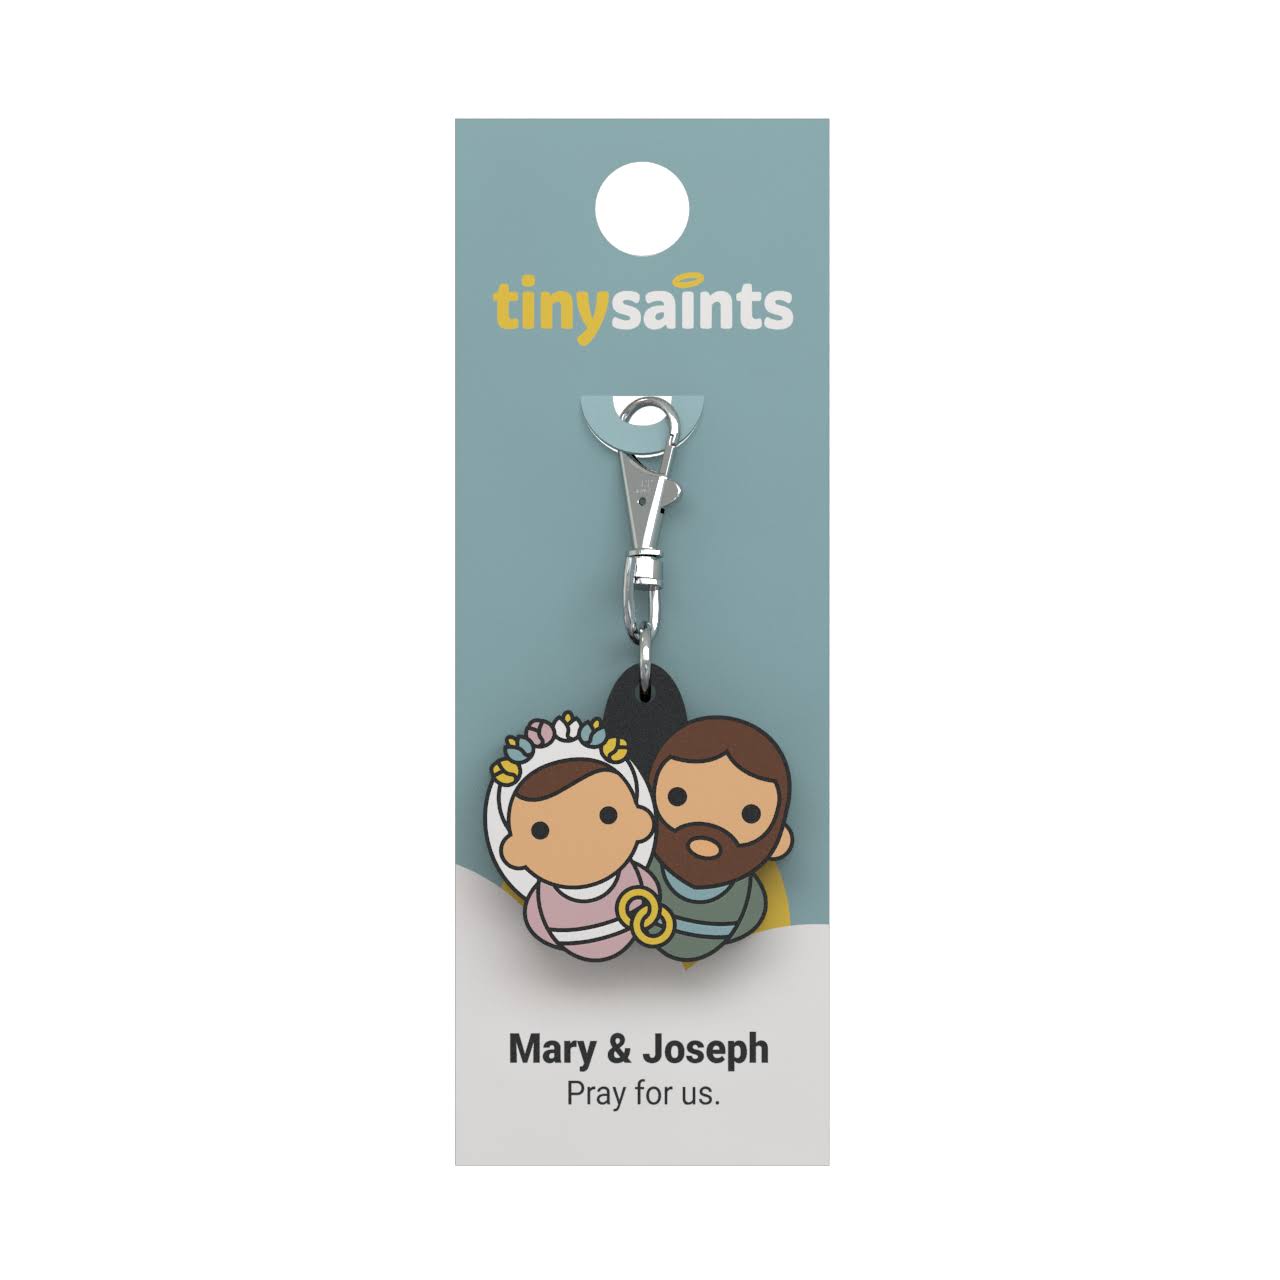 Mary and Joseph (Special Edition) by Daywind